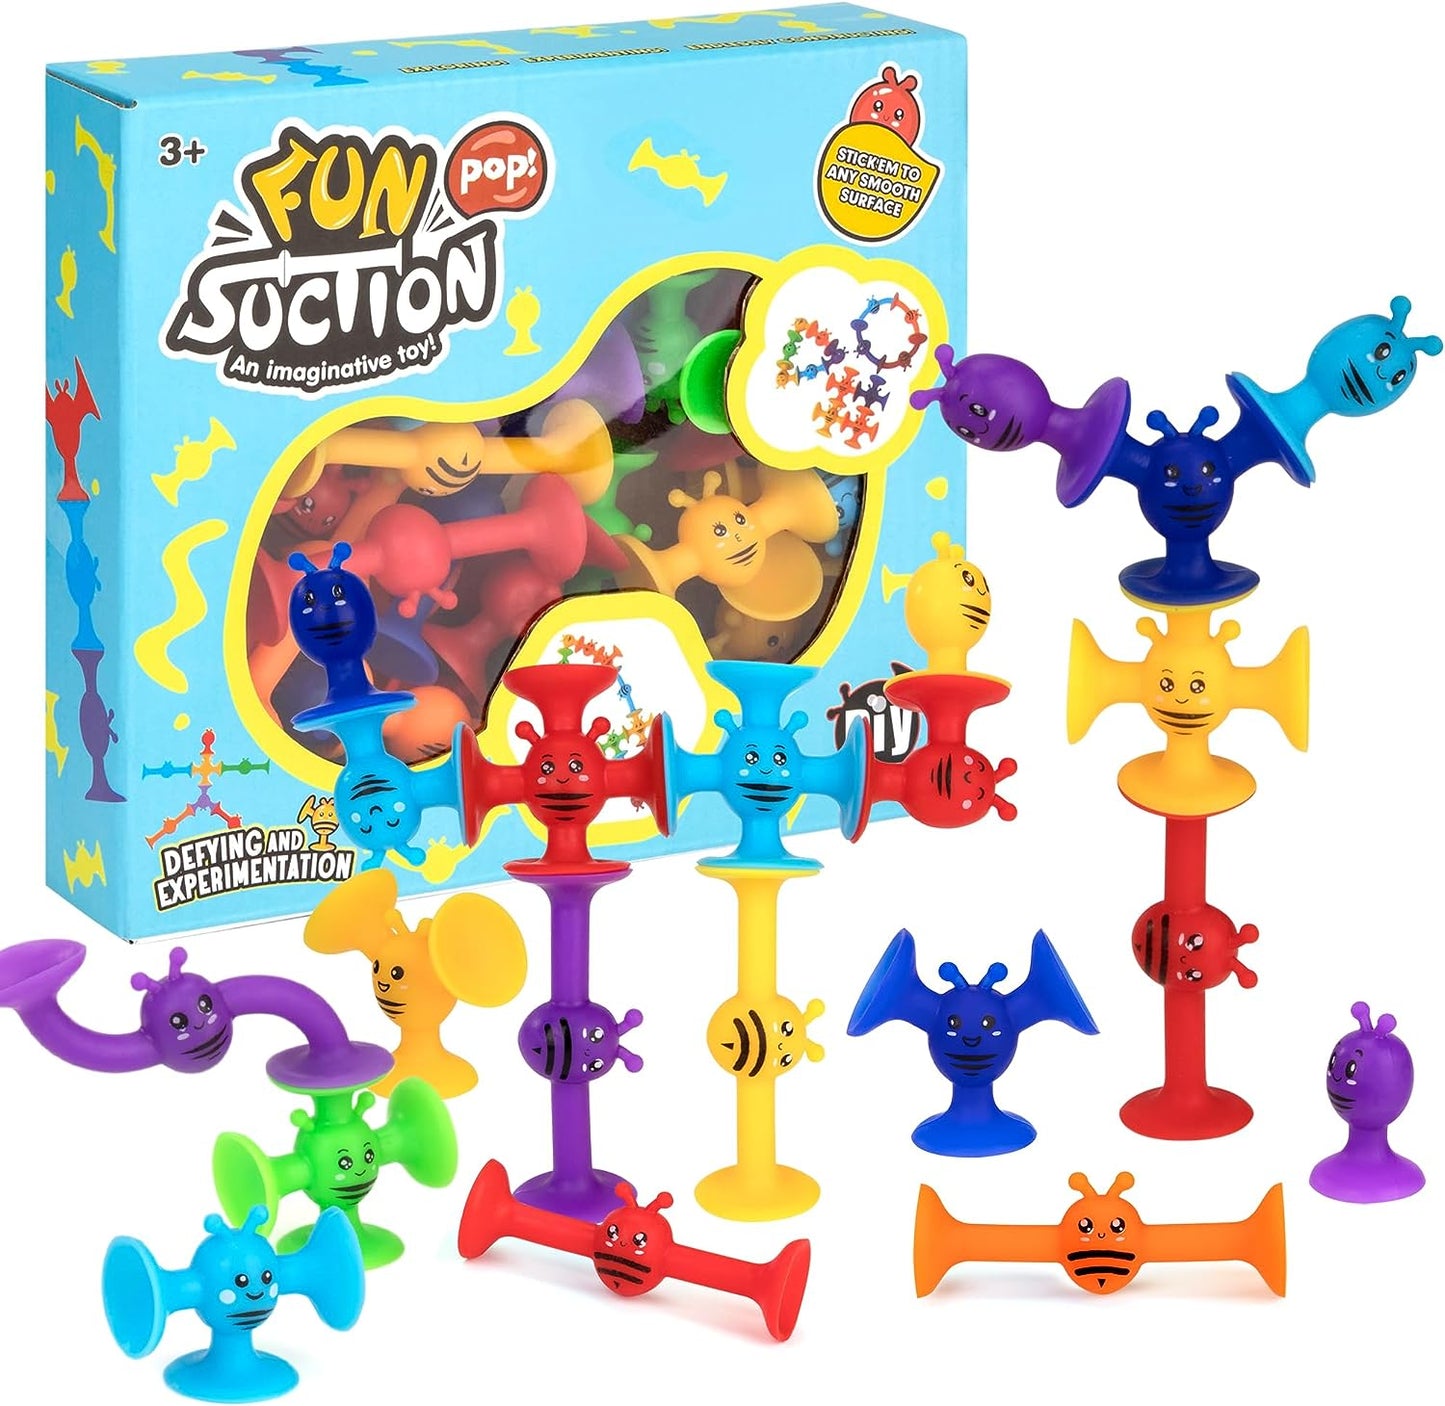 Silicone Suction Cup Toys - 38 Pcs